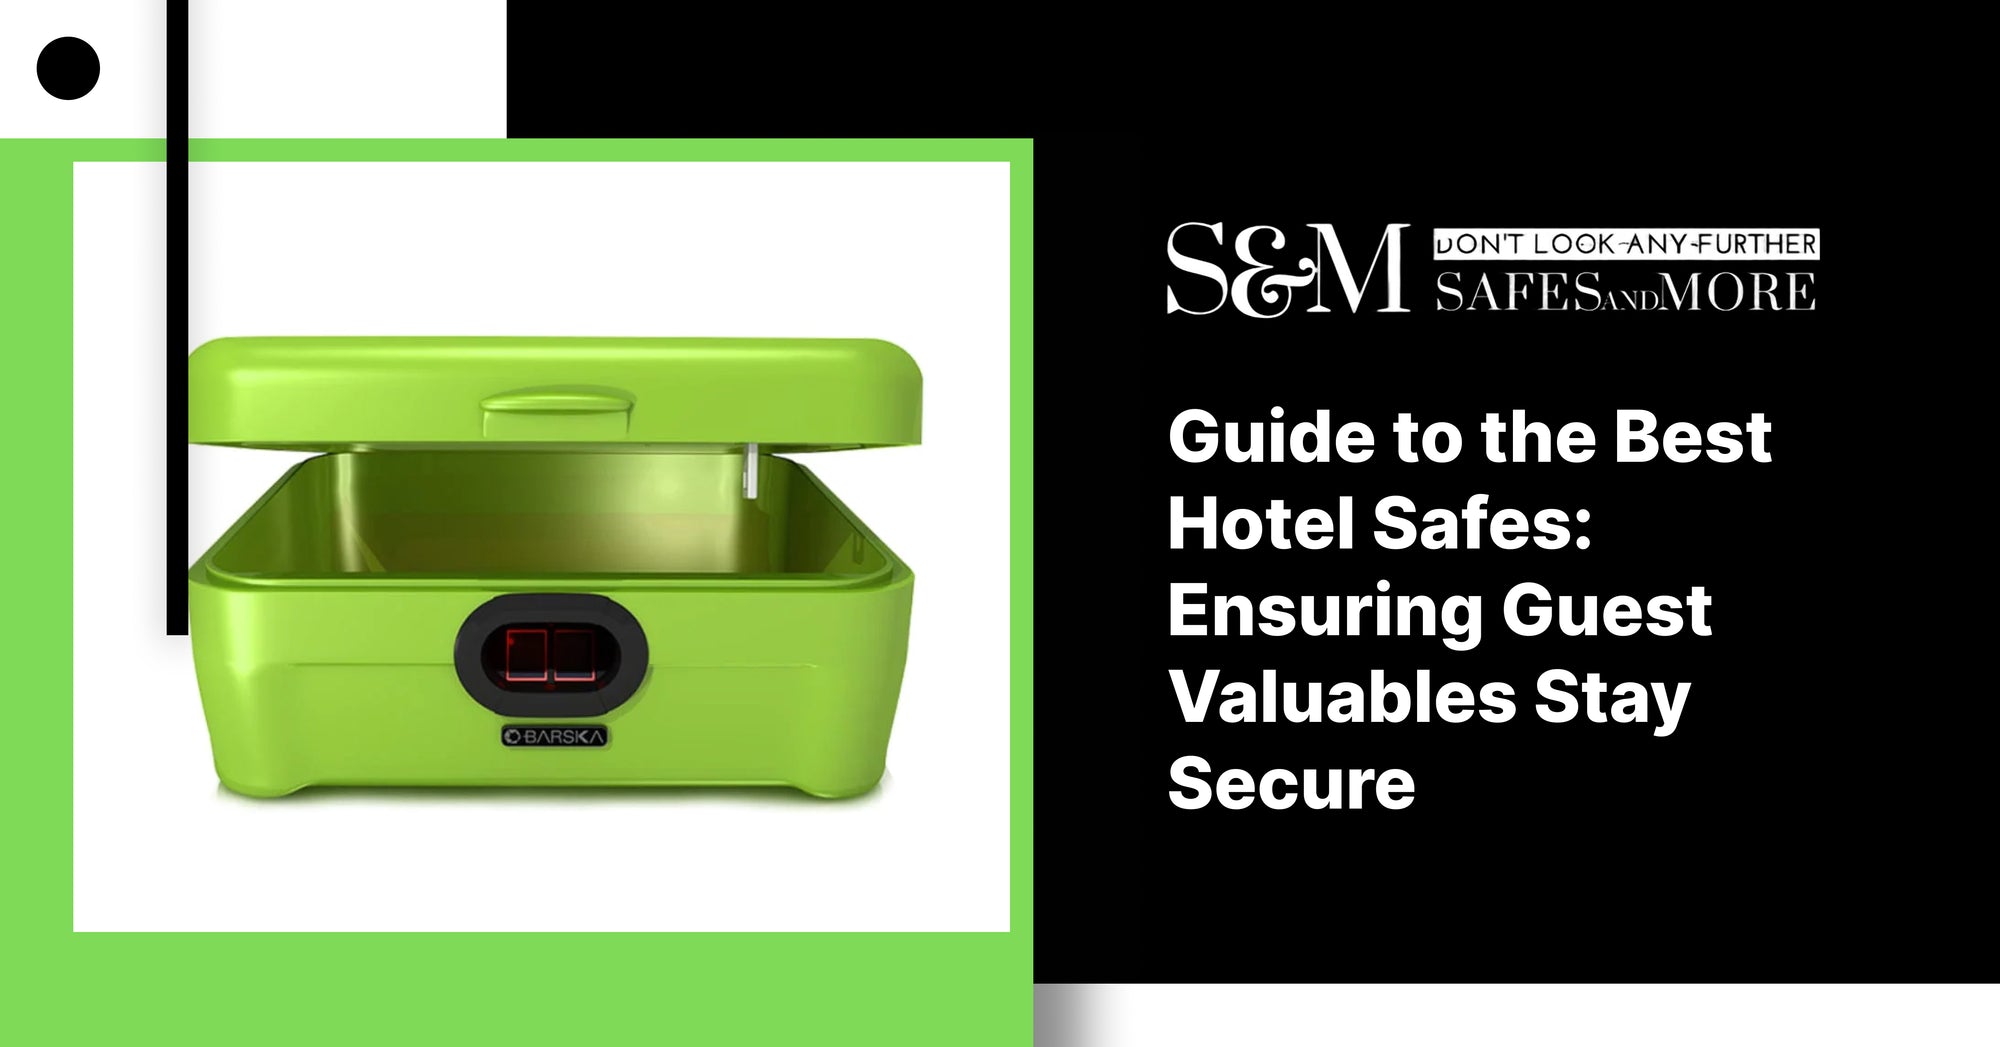 Guide to the Best Hotel Safes: Ensuring Guest Valuables Stay Secure